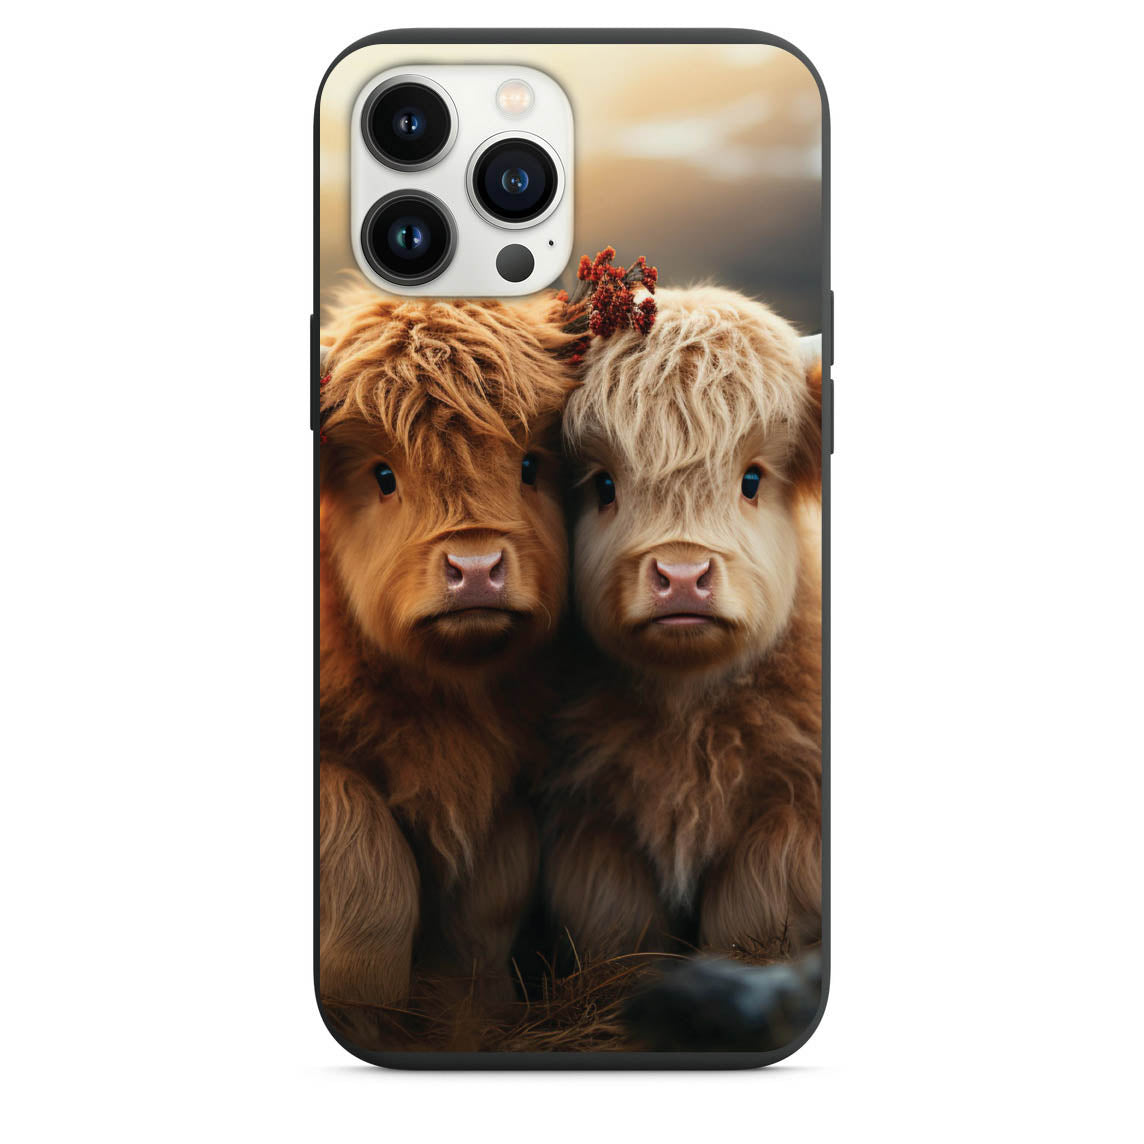 Adorable Baby Highland Cows Phone Case for iPhone 7 8 X XS XR SE 11 12 13 14 Pro Max Mini Note 10 20 s10 s10s s20 s21 20 Plus Ultra